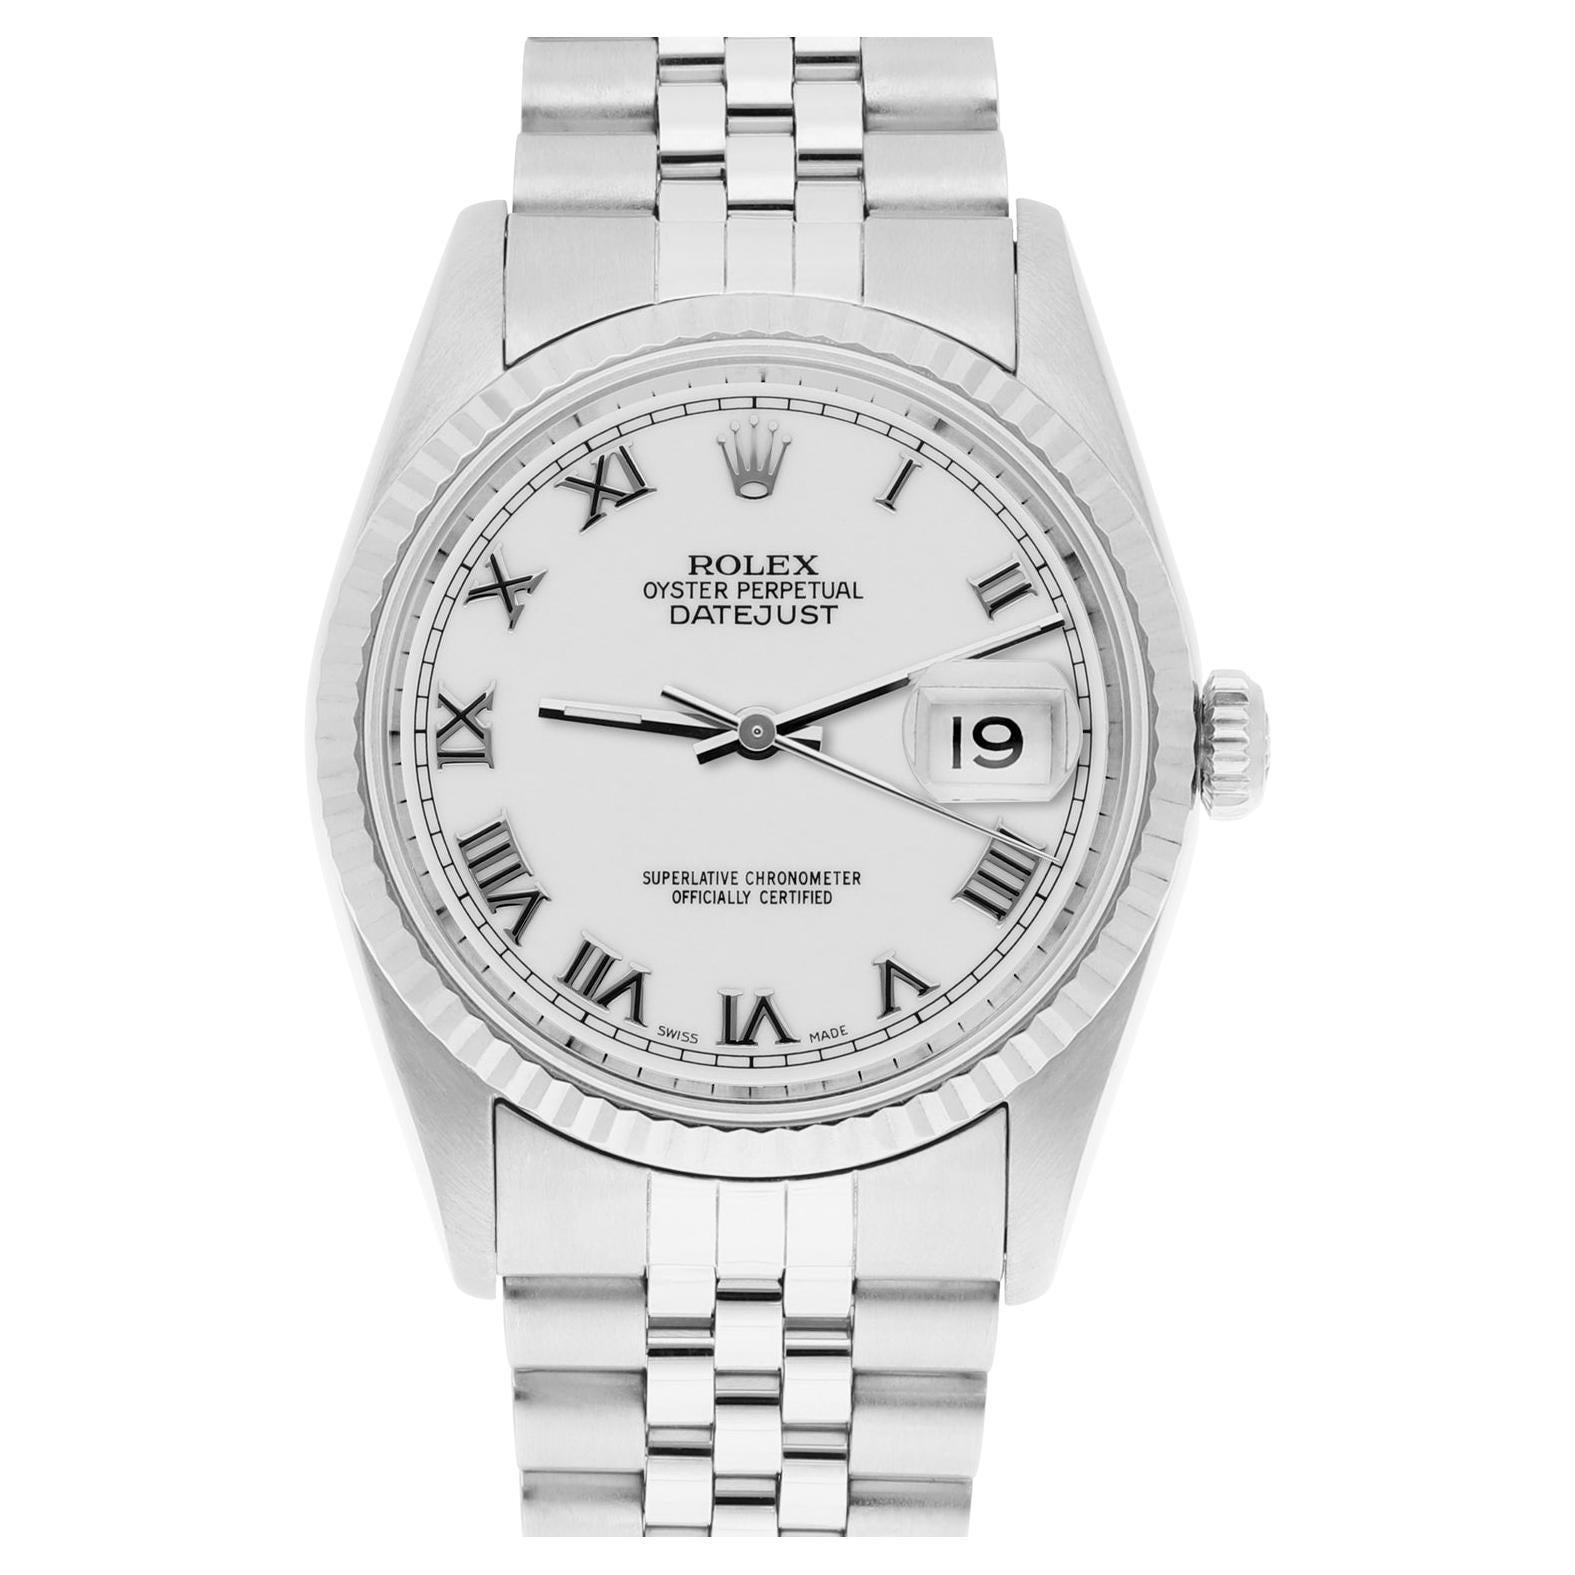 Rolex Datejust 36mm Stainless Steel 16234 White Roman Dial, Jubilee Circa 1995 For Sale